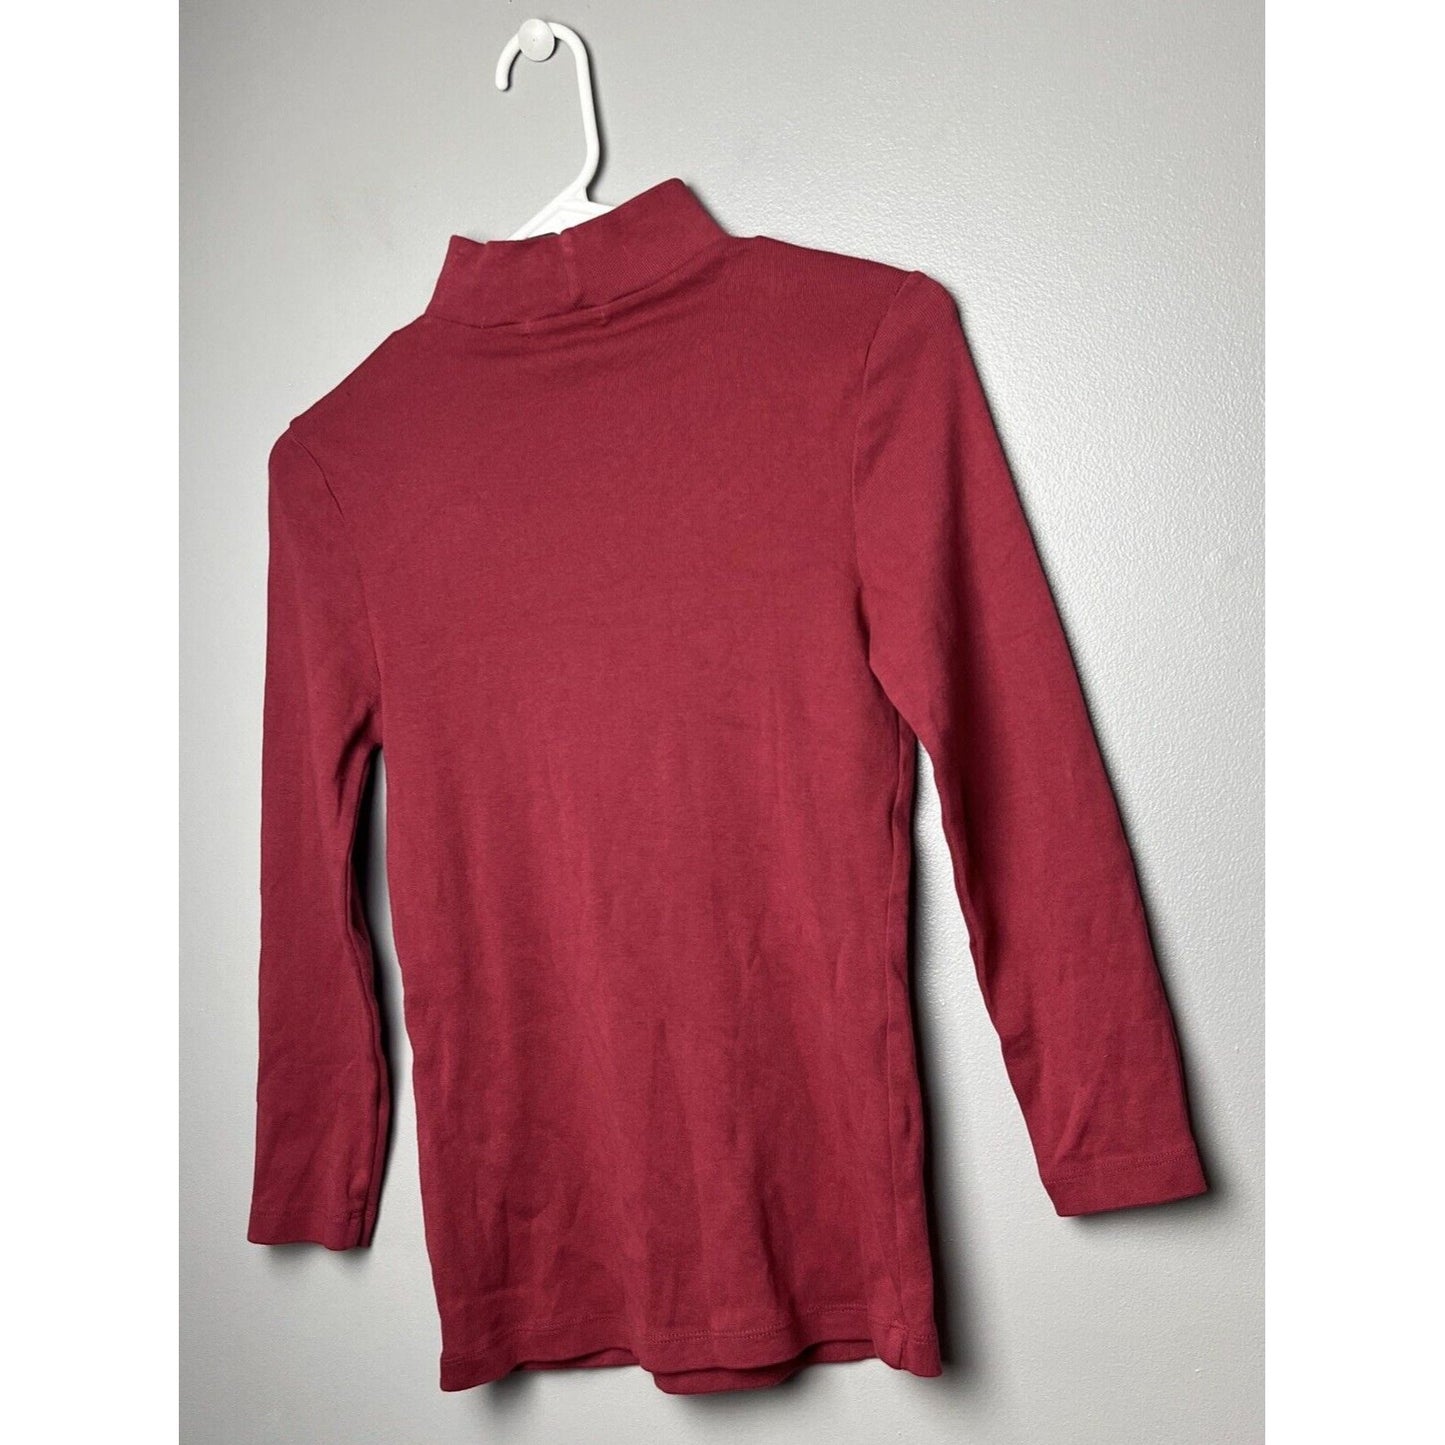 Michael Stars Turtle Neck Sweater Women's Small Red OS